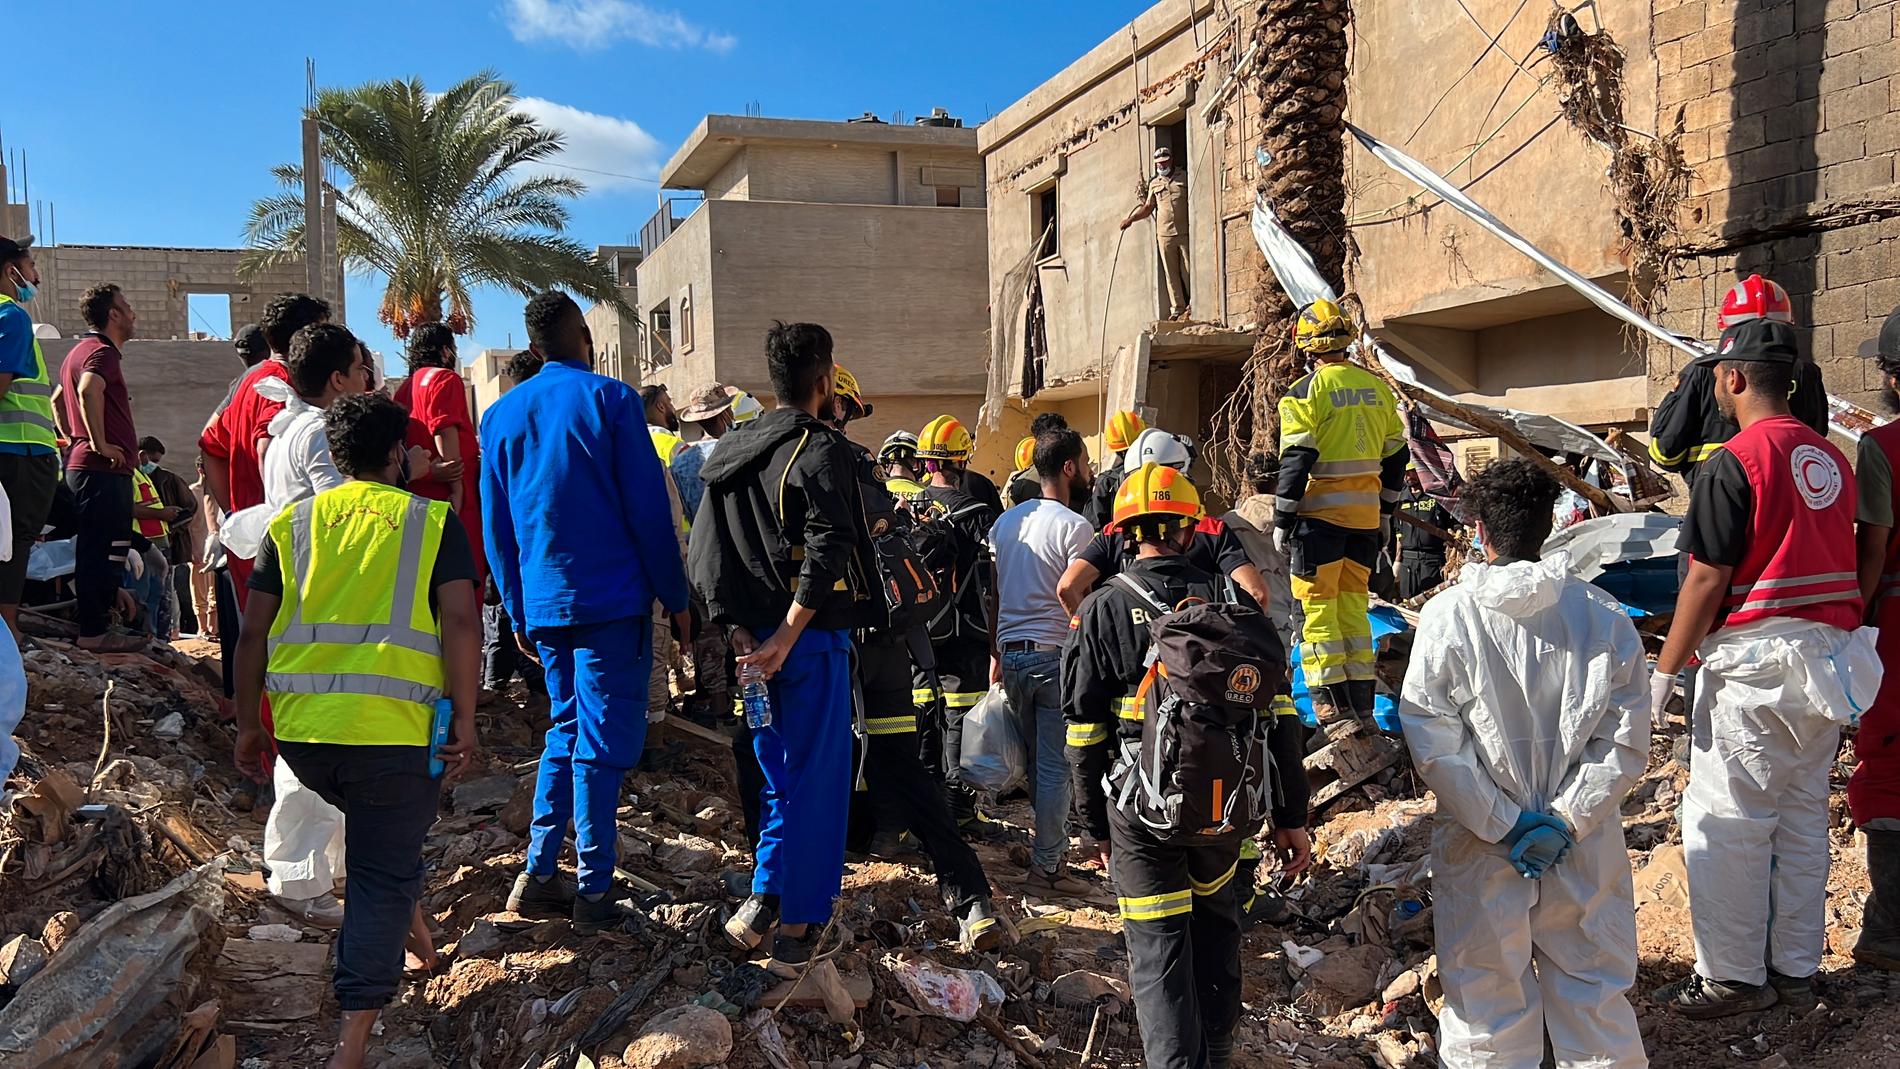 Search for survivors: Rescue crews are combing the ruins looking for the dead and survivors. 